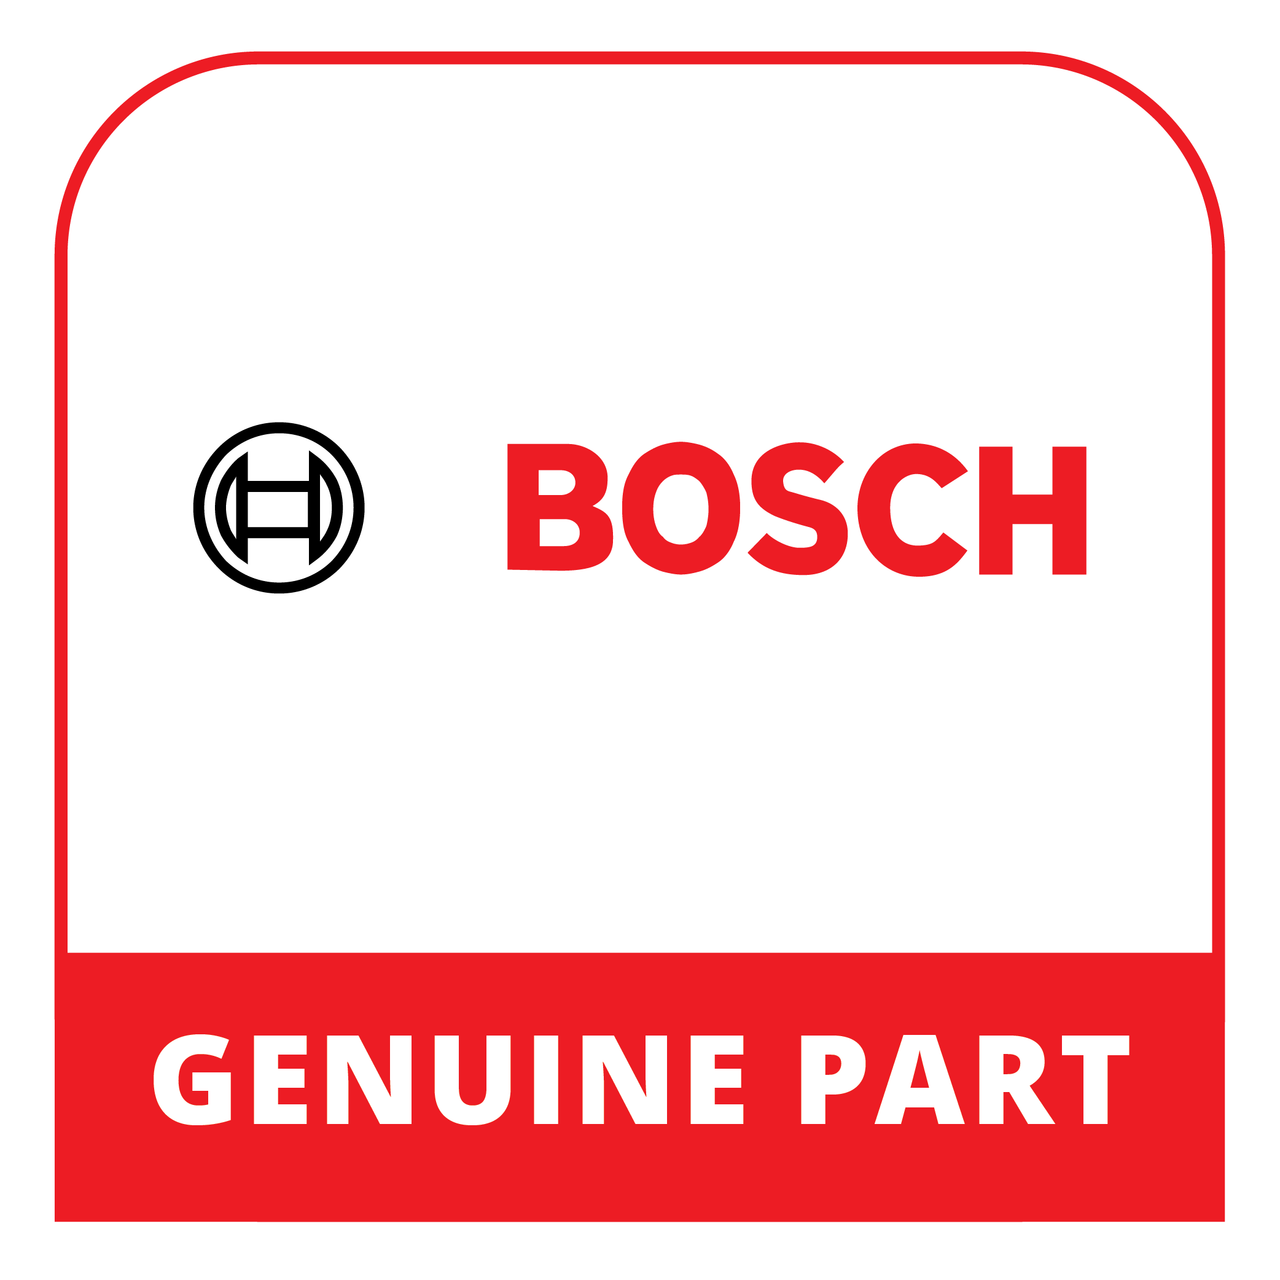 Bosch (Thermador) 20001380 - Drawer - Genuine Bosch (Thermador) Part